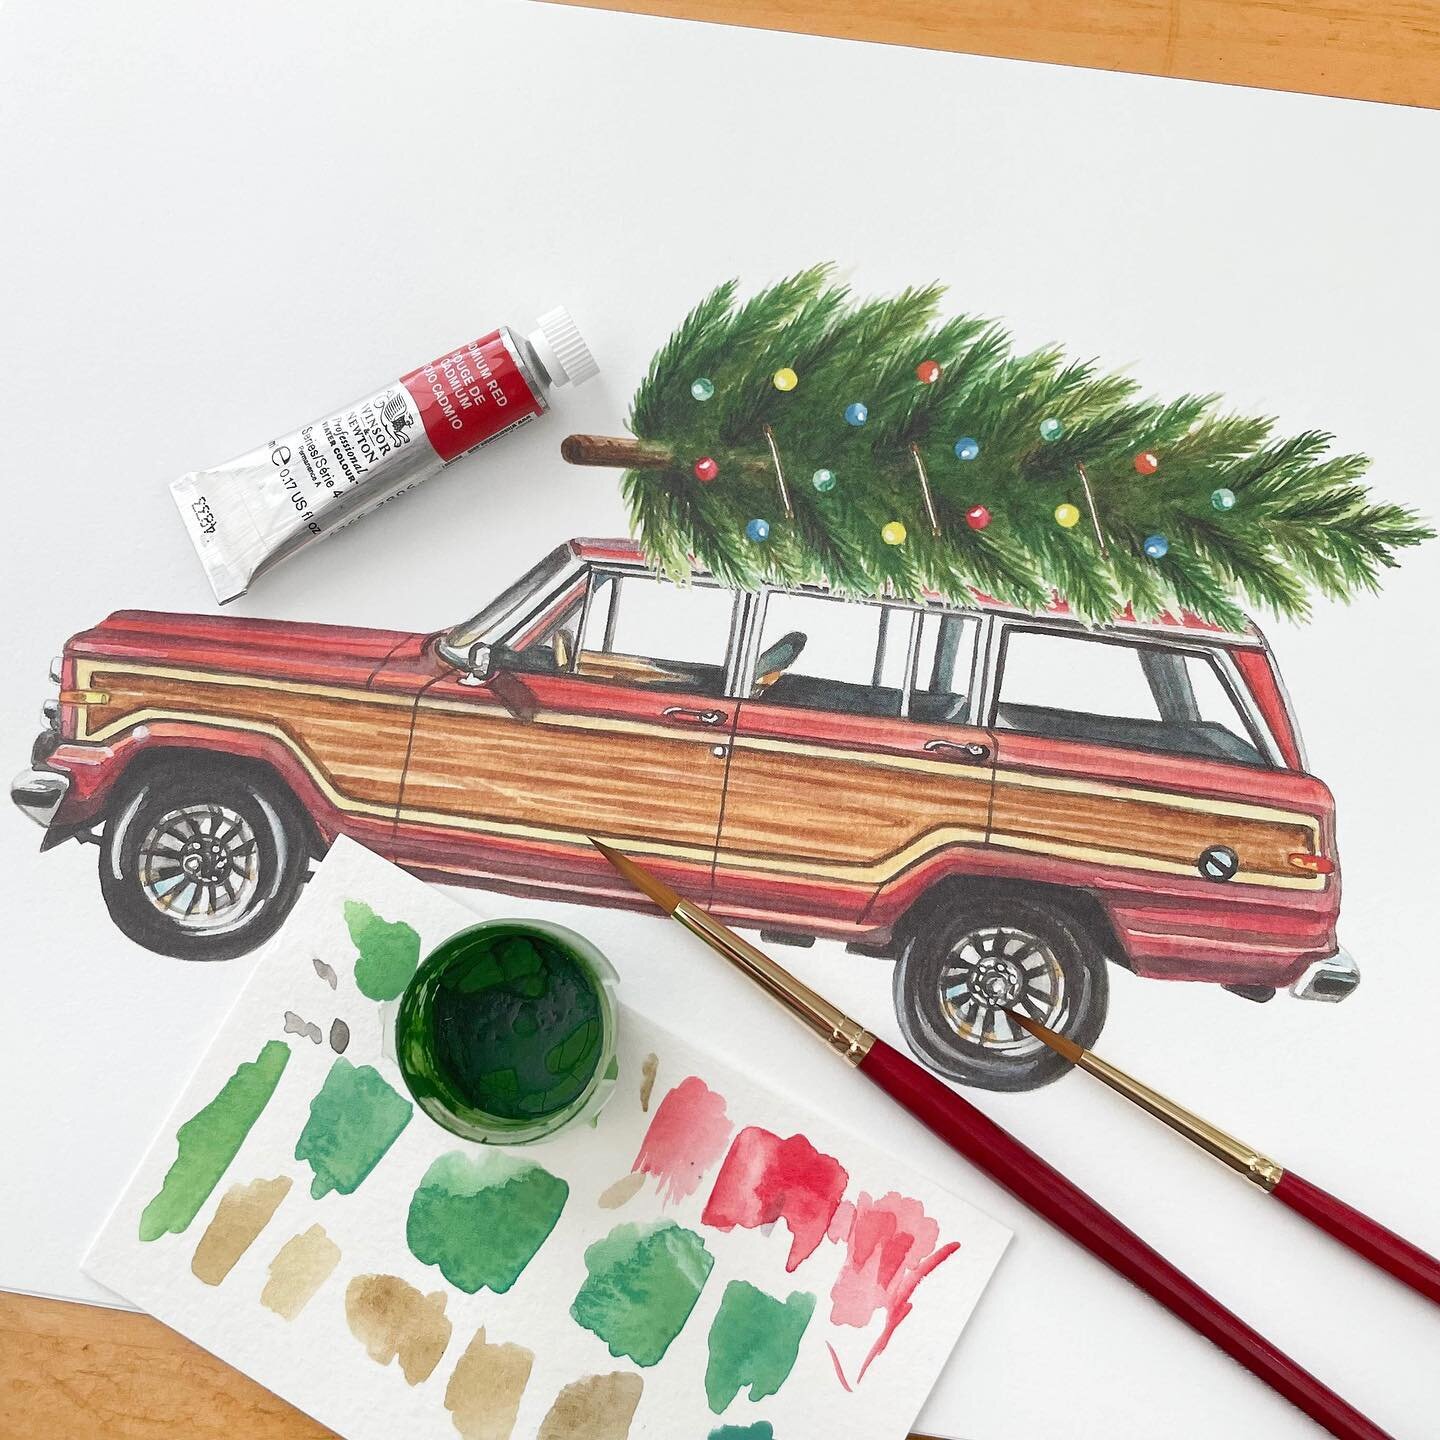 This vintage holiday Jeep Wagoneer made its debut this season, decked out in holiday style with a Christmas tree and colorful ornaments! Available as an 8x10 art print!🎄